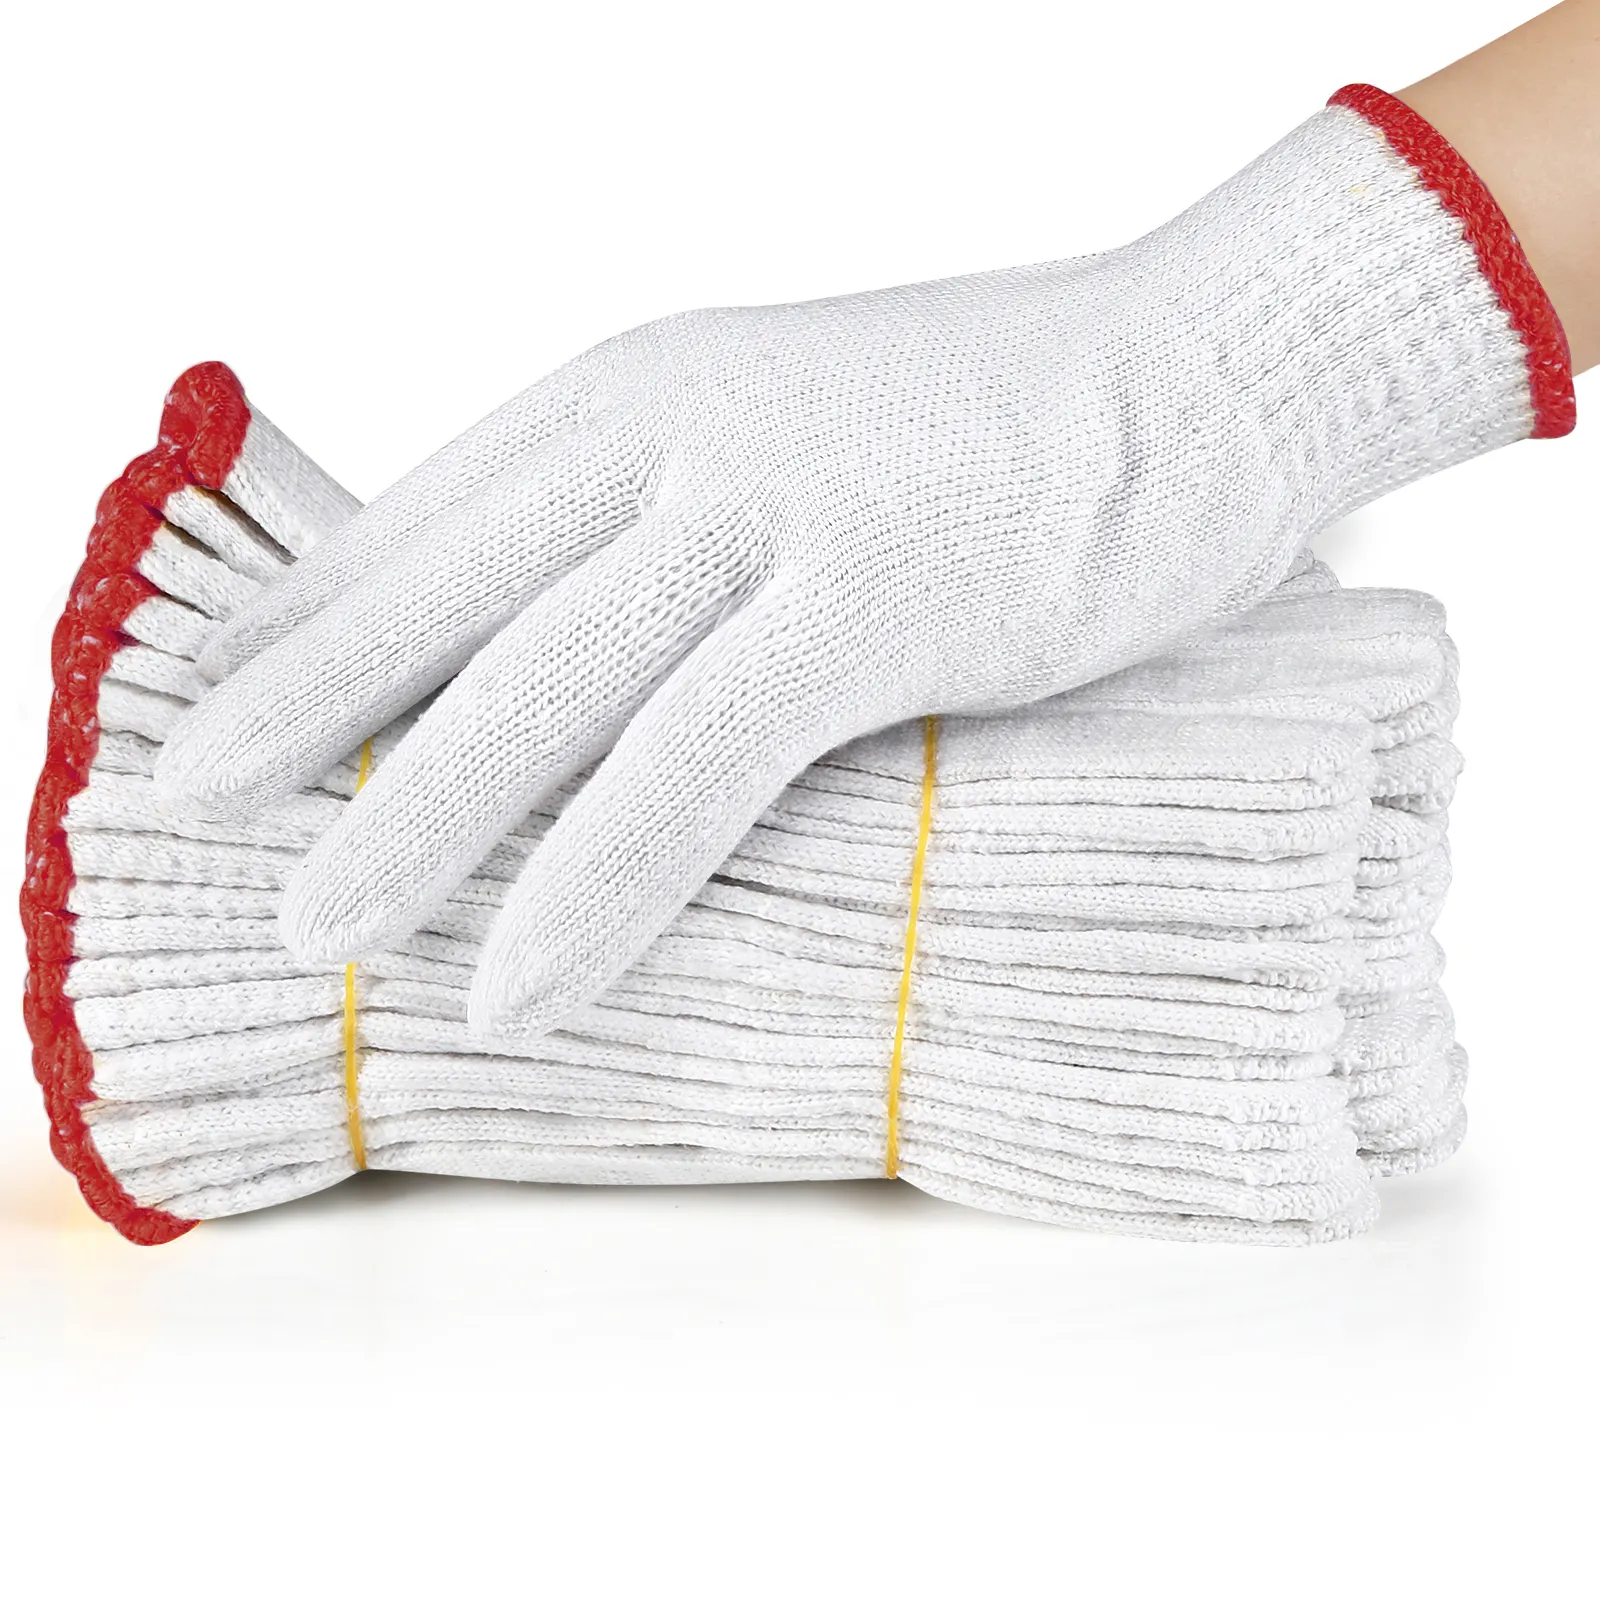 China Wholesale 30-60g/Pairs White Cotton Knitted Hand Glove Guante Safety Work Gloves